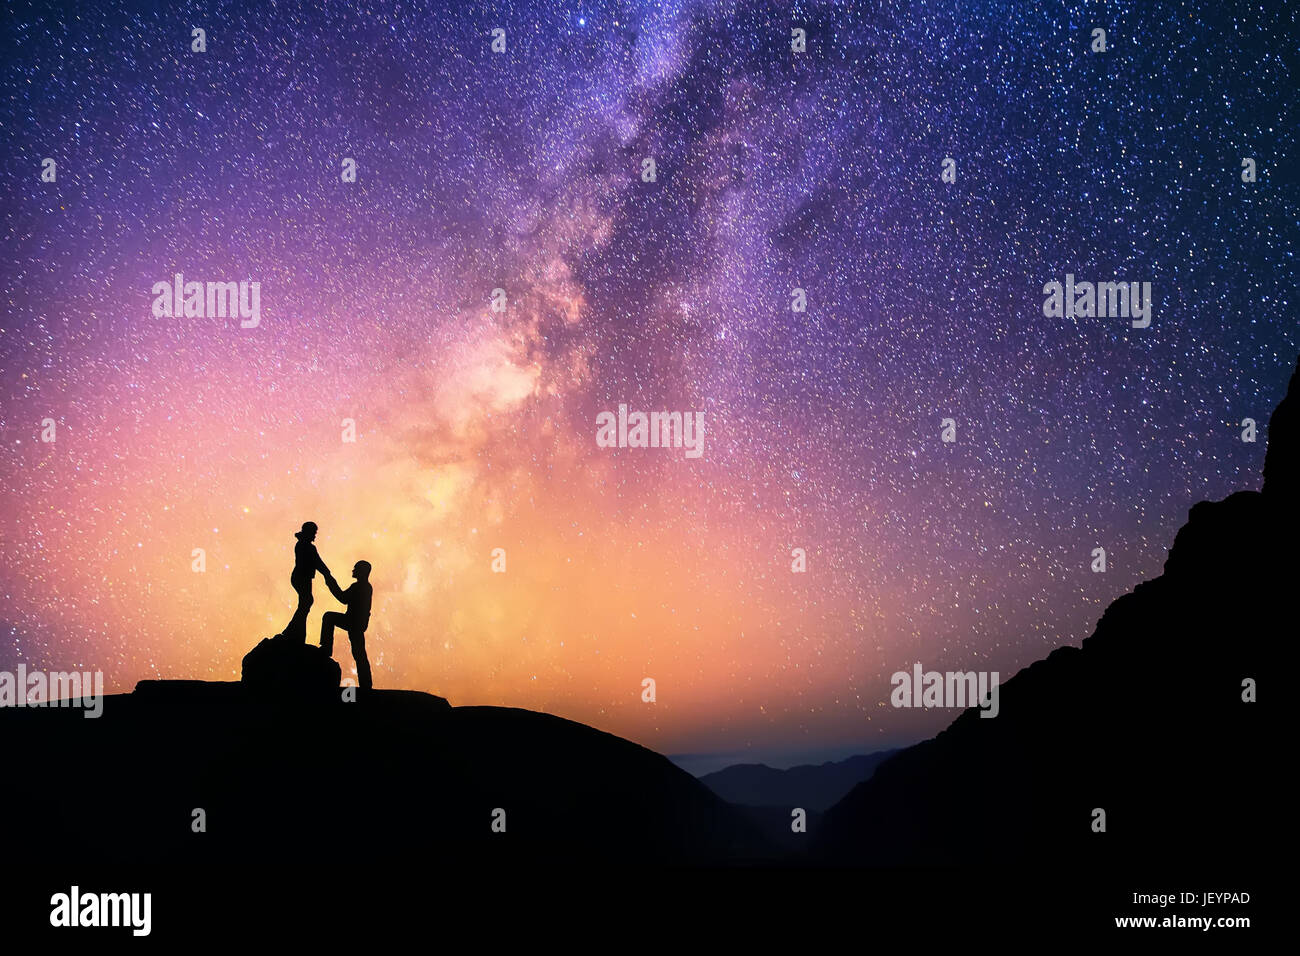 Romantic couple standing together holding hands in the mountains. Beautiful Milky Way galaxy on the background. Stock Photo